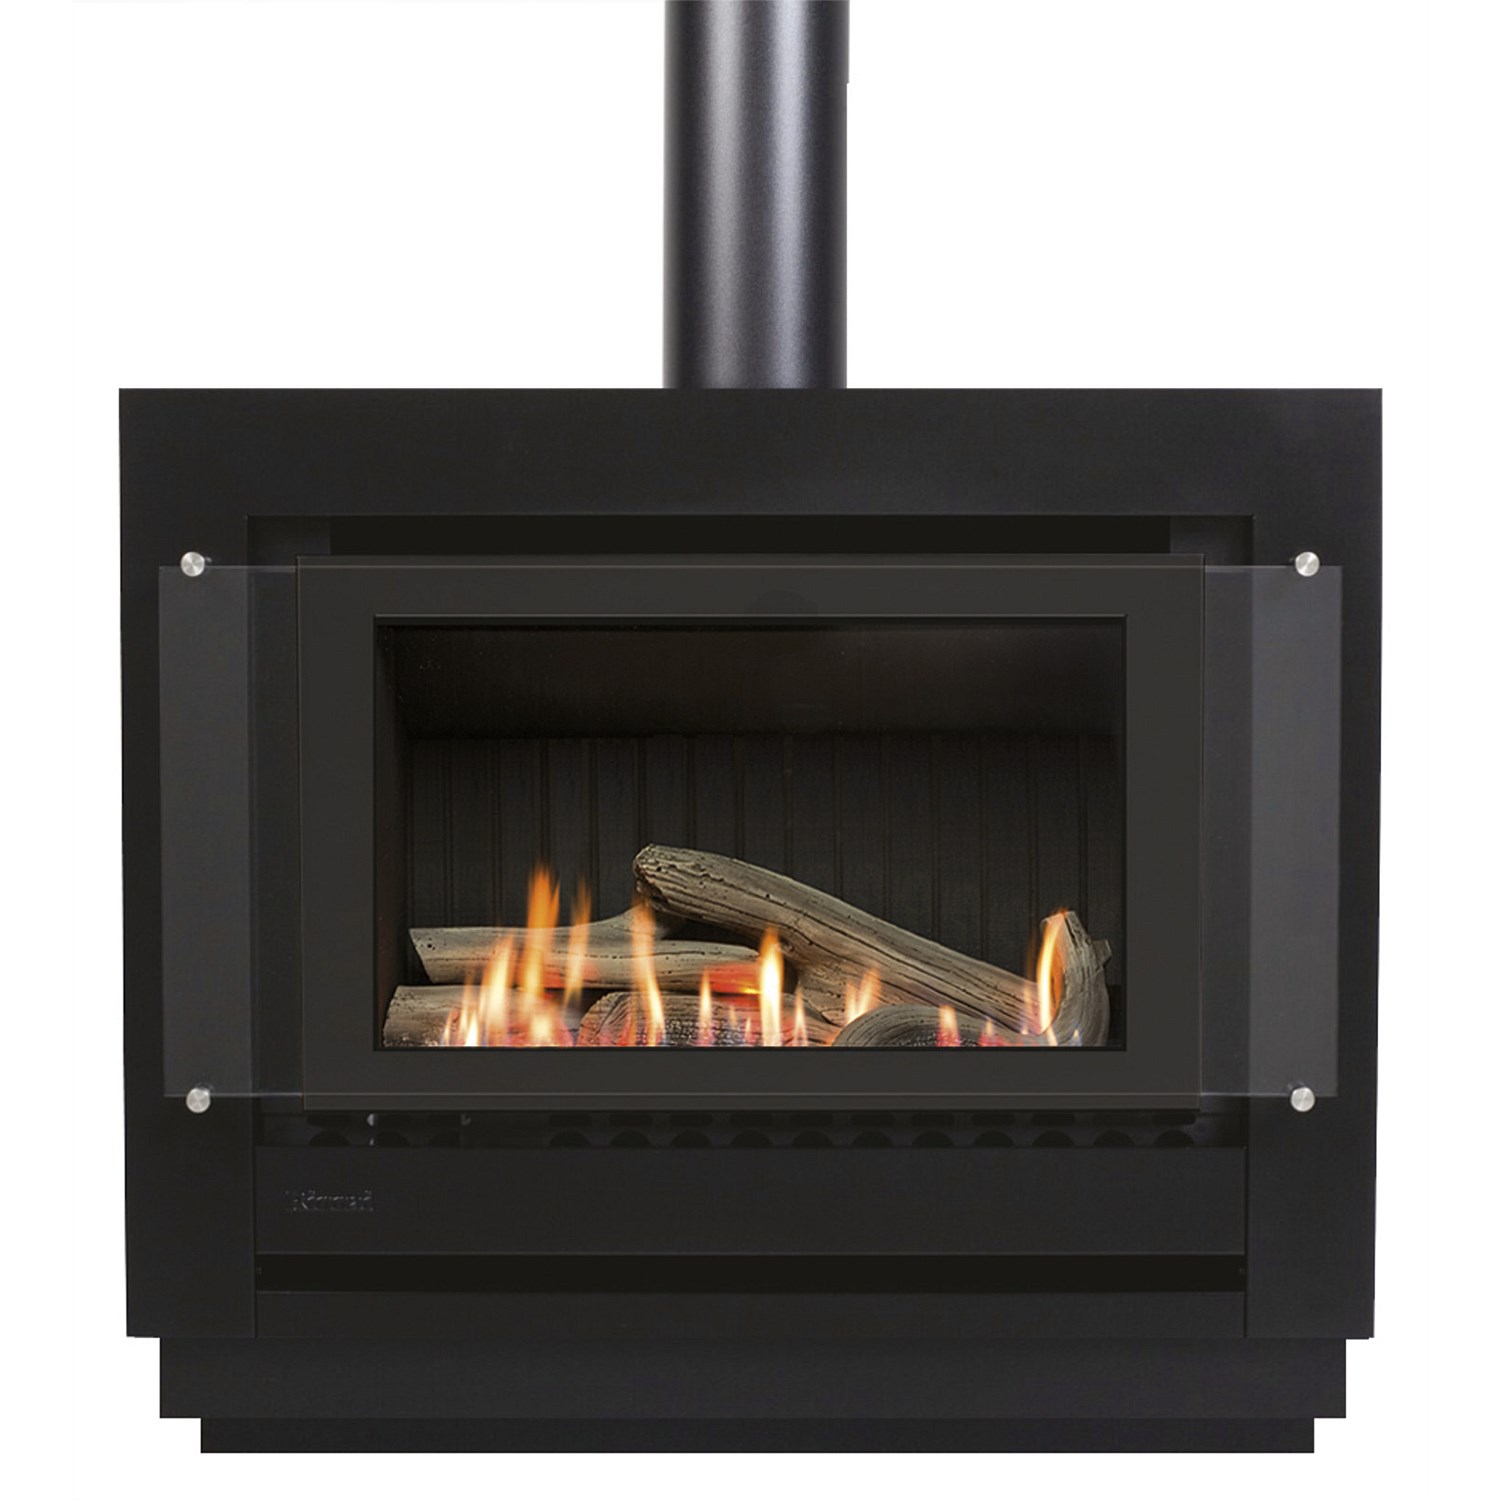 plumbing-world-heating-products-rinnai-neo-lpg-free-standing-gas-fire